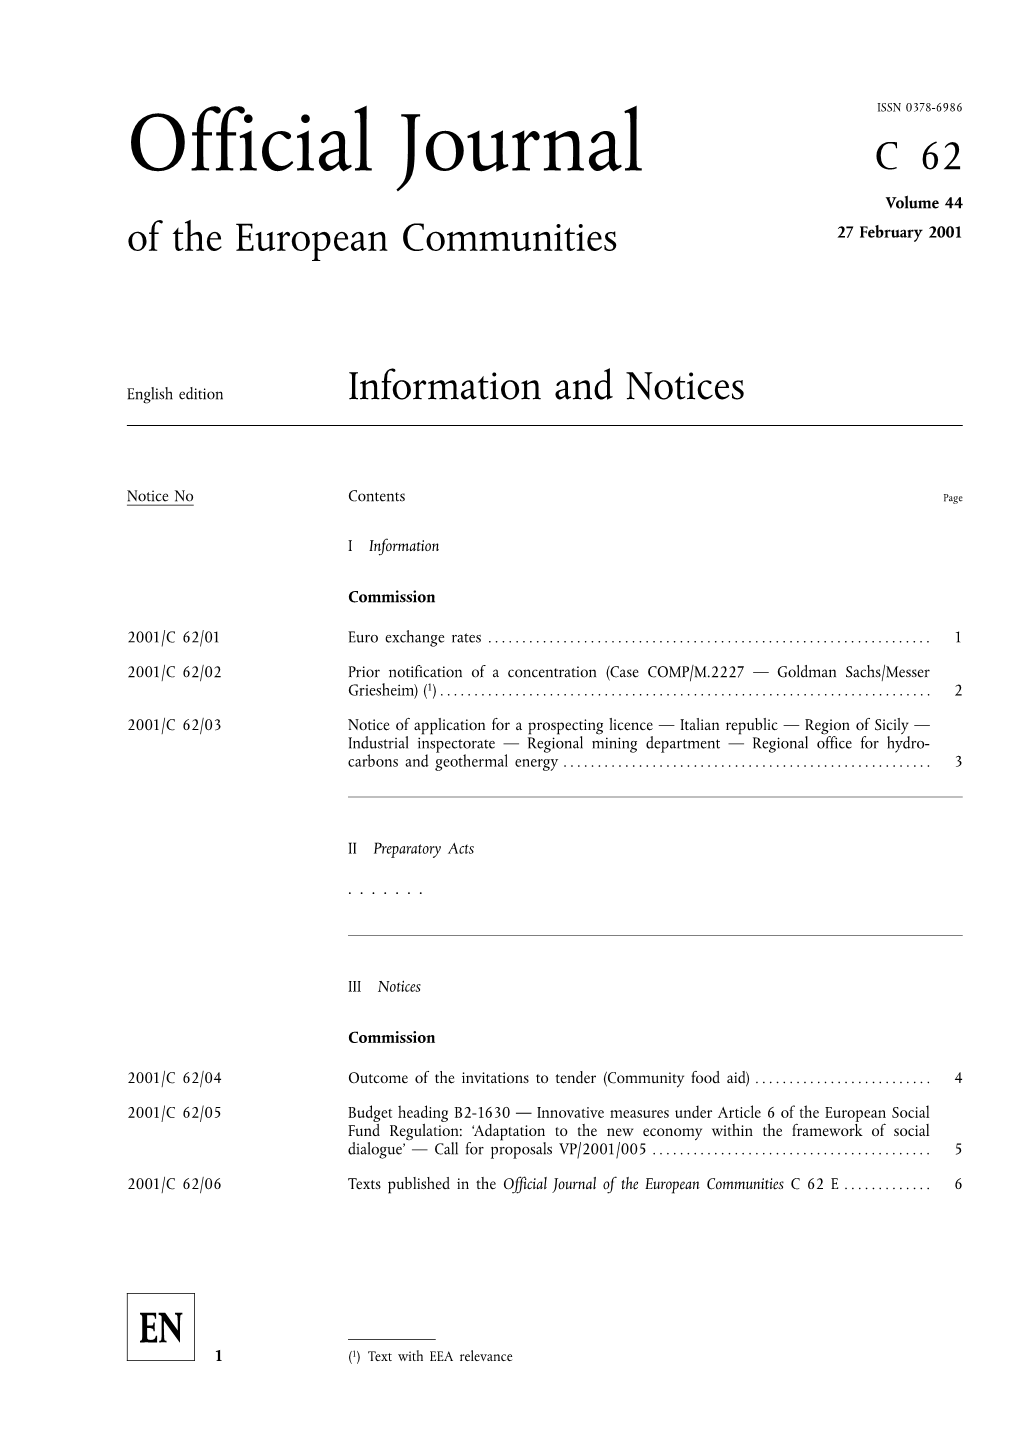 Official Journal C62 Volume 44 of the European Communities 27 February 2001